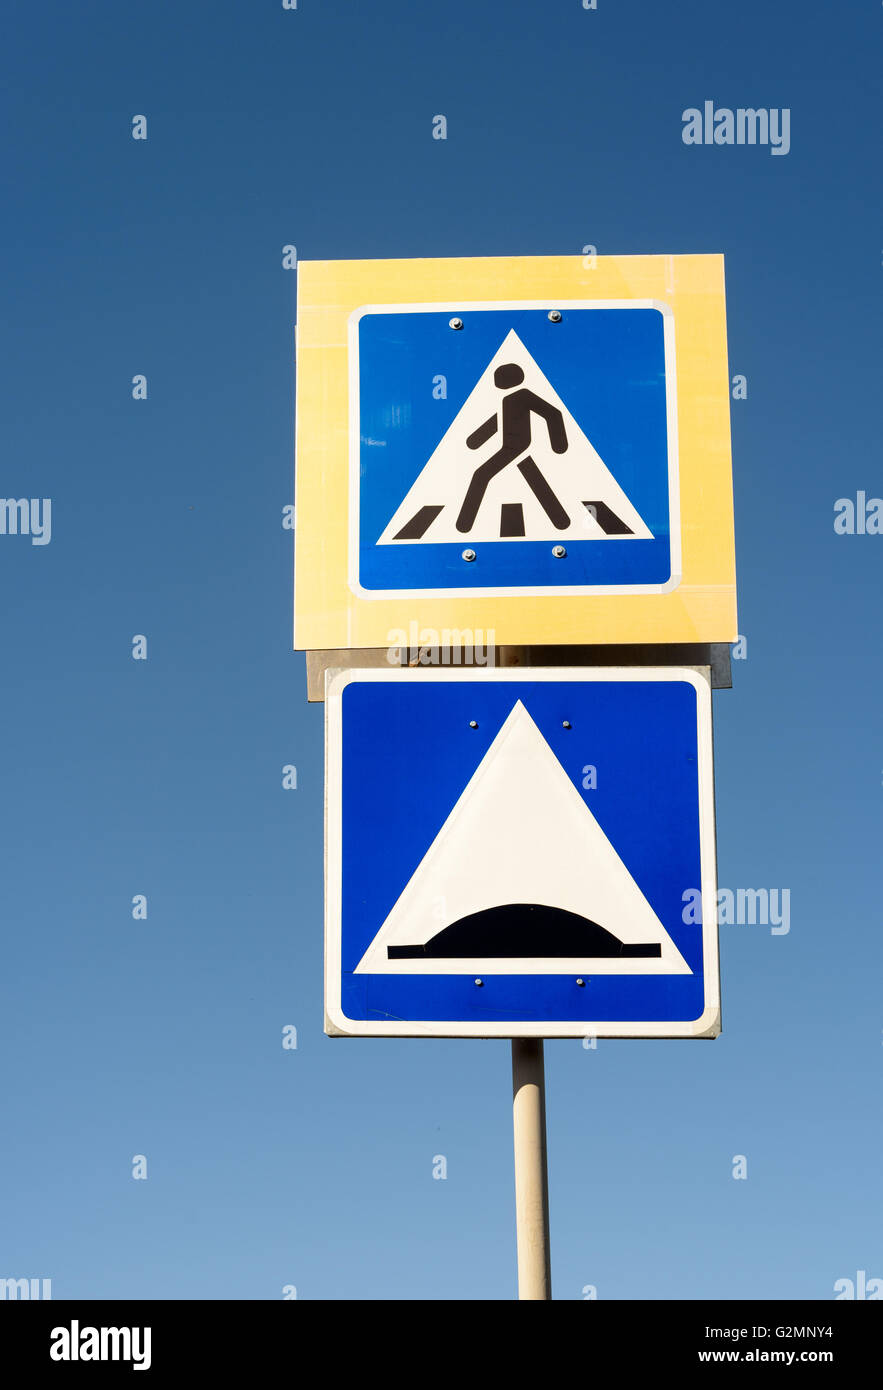 Road safety sign of a pedestrian crossing with a speed hump warning symbol Stock Photo